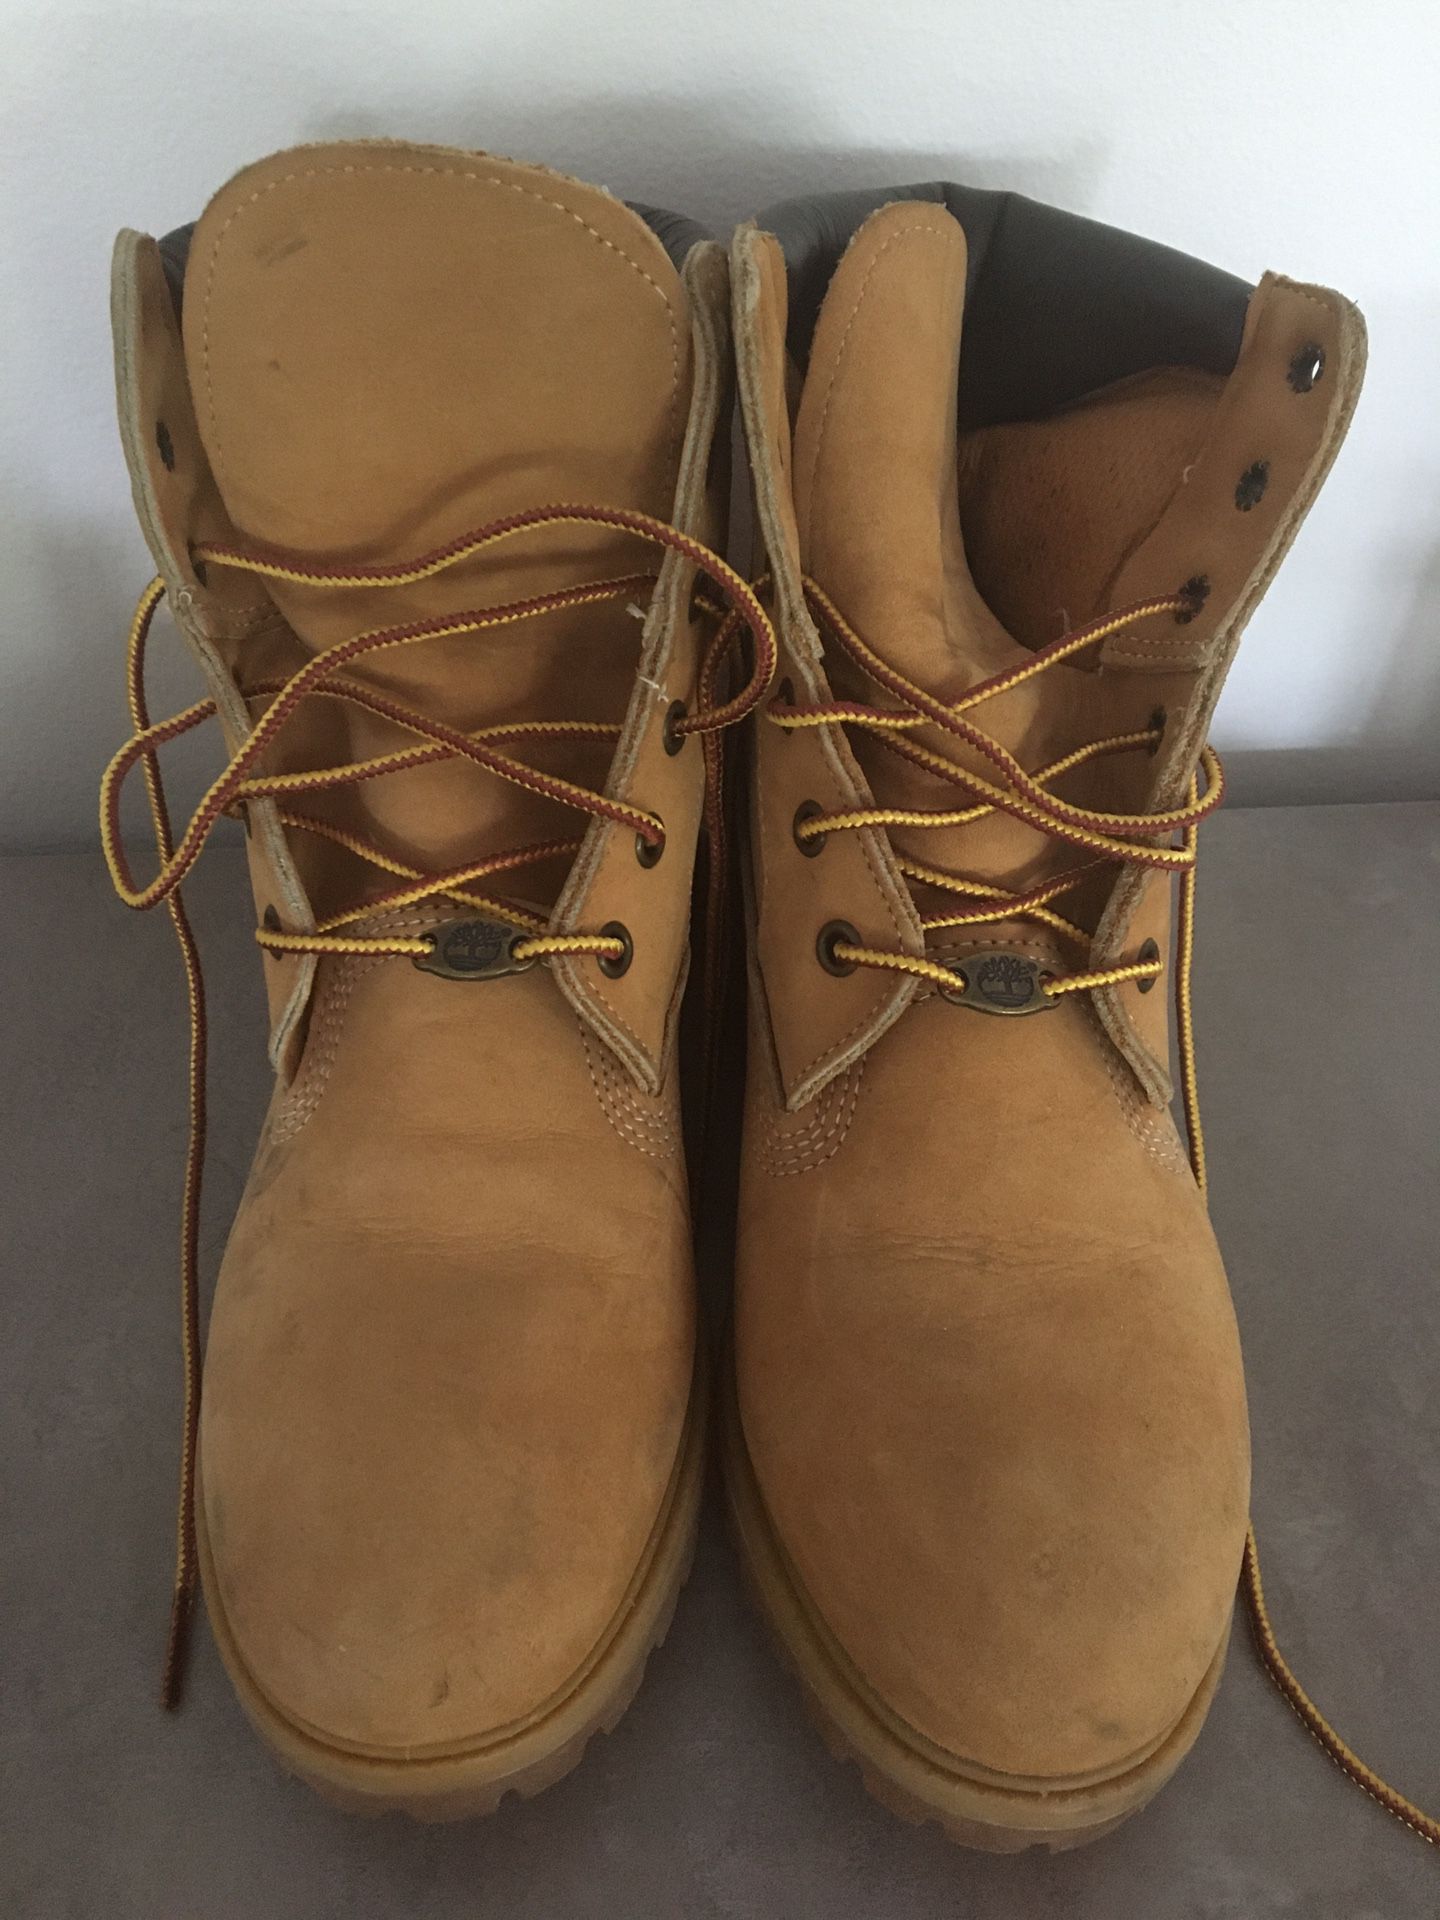 Timberland boots size 8 women, almost new